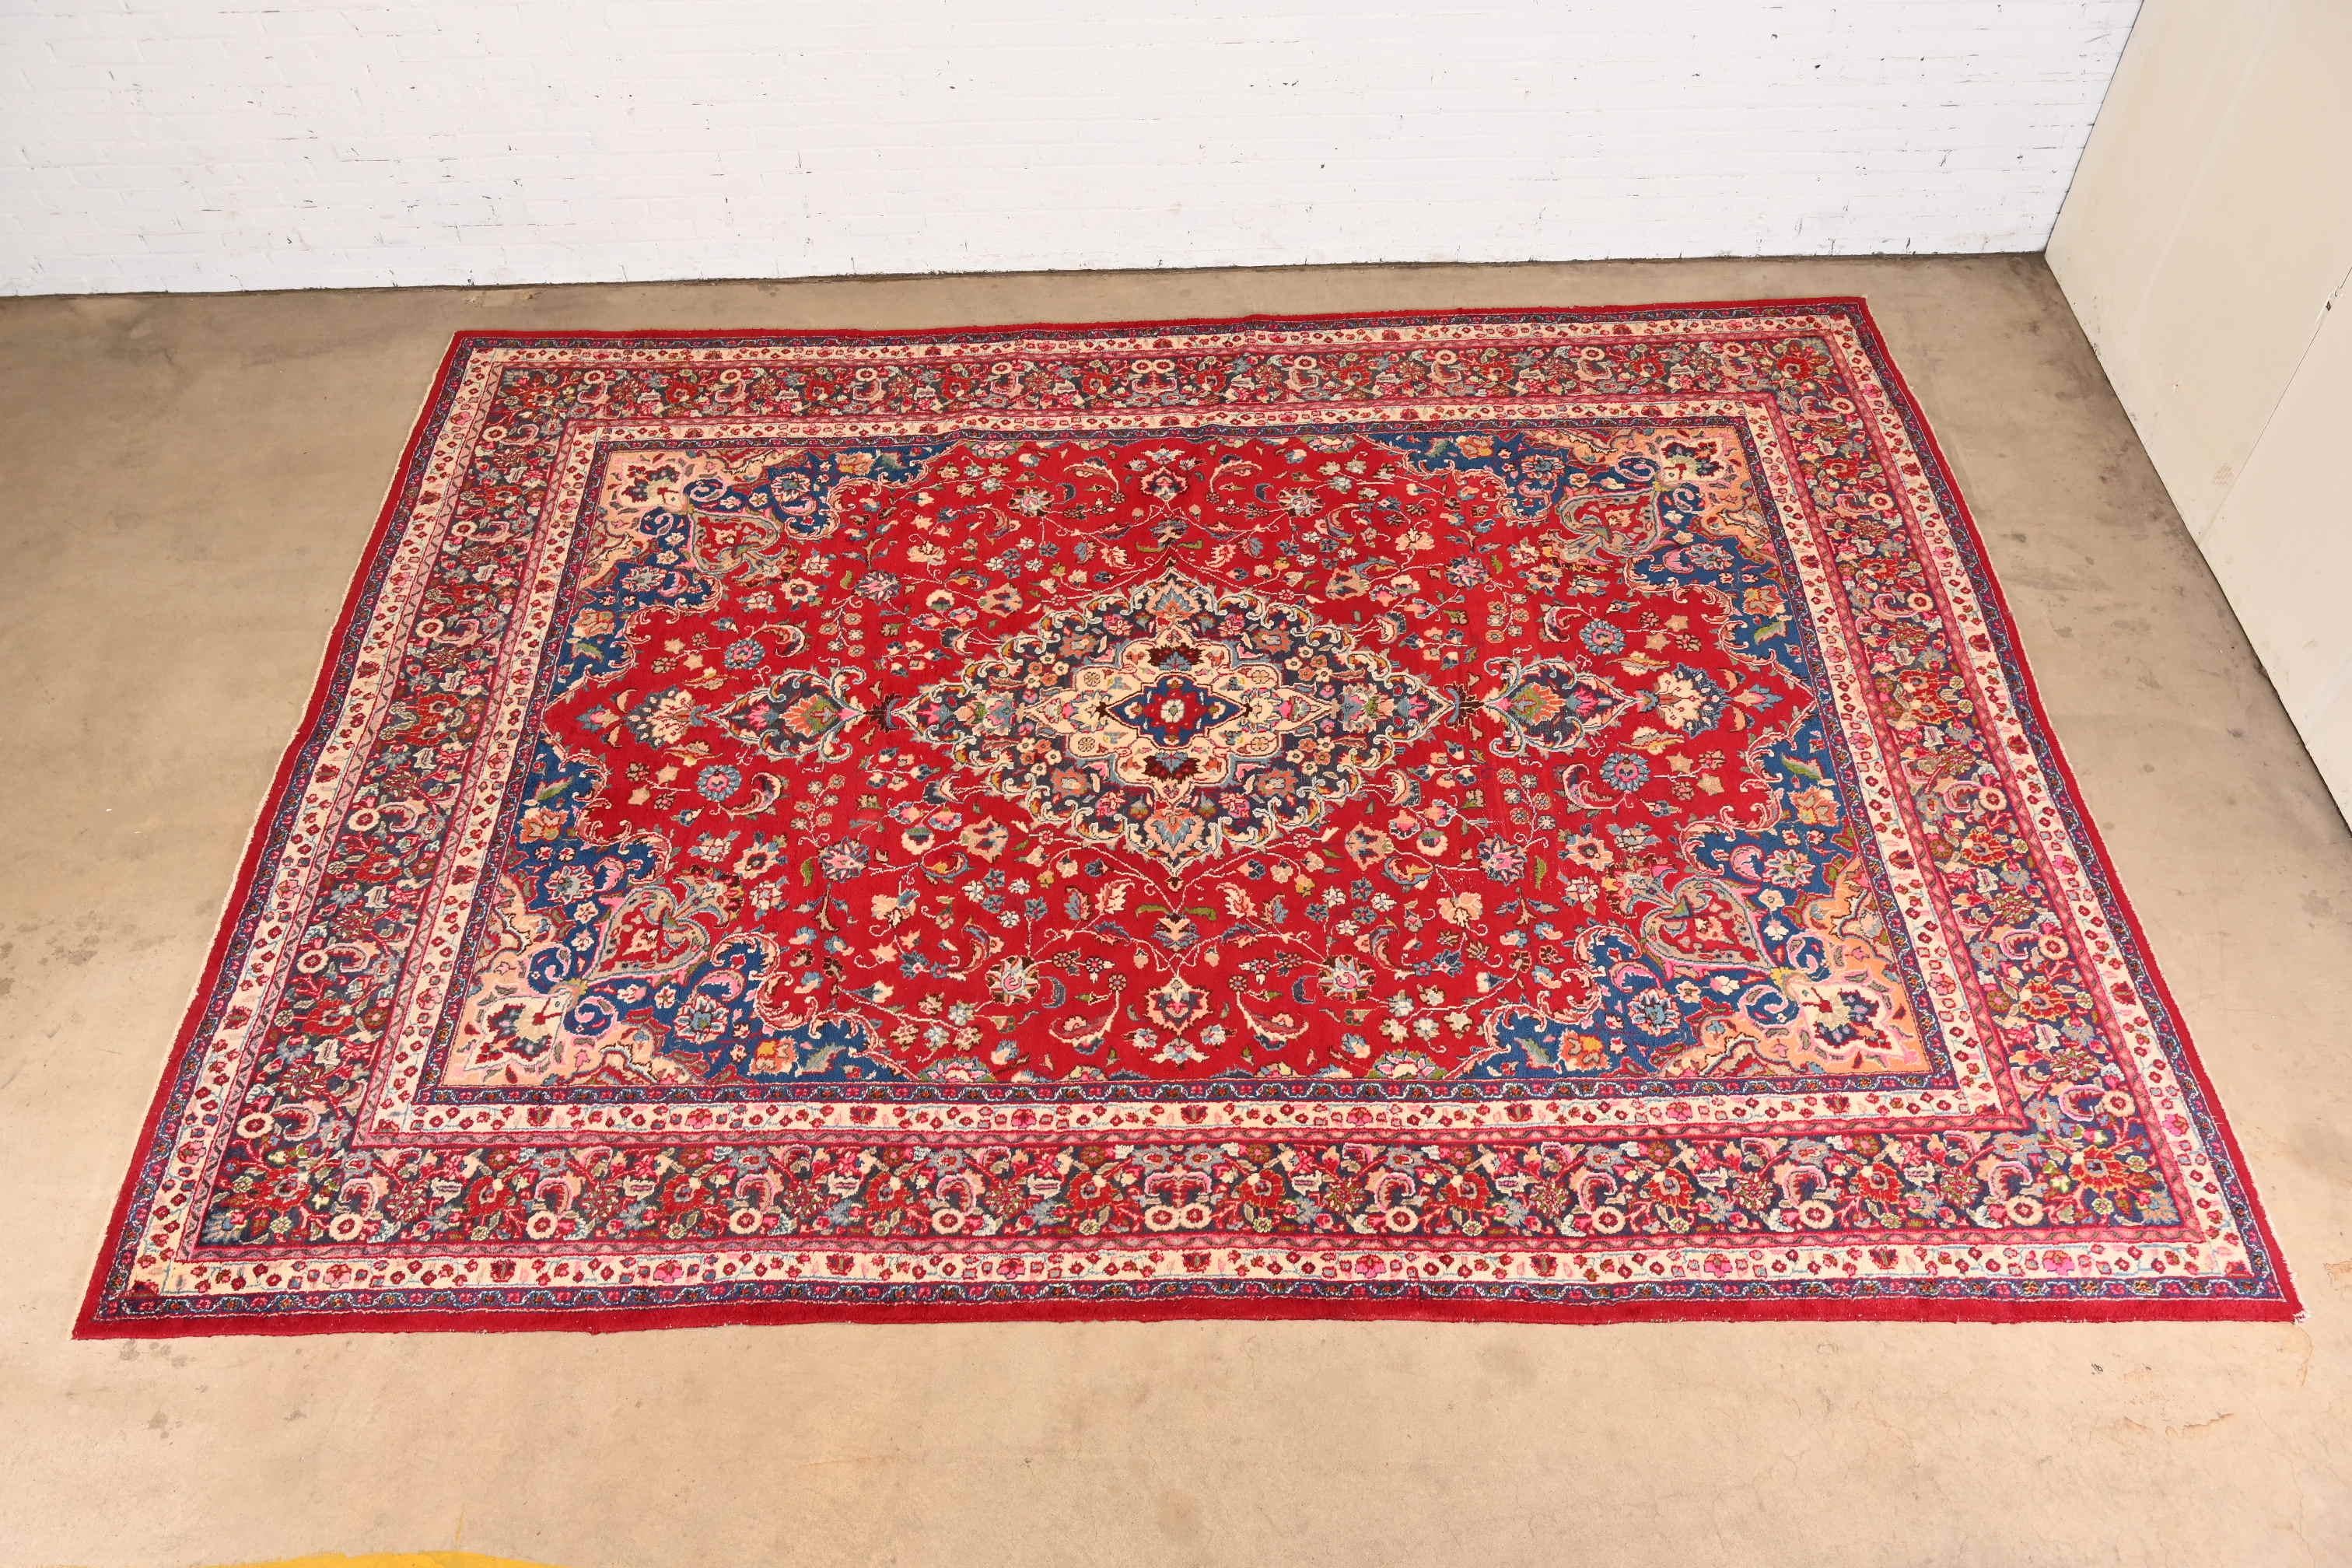 intage Hand-Knotted Persian Tabriz Room Size Wool Area Rug In Good Condition For Sale In South Bend, IN